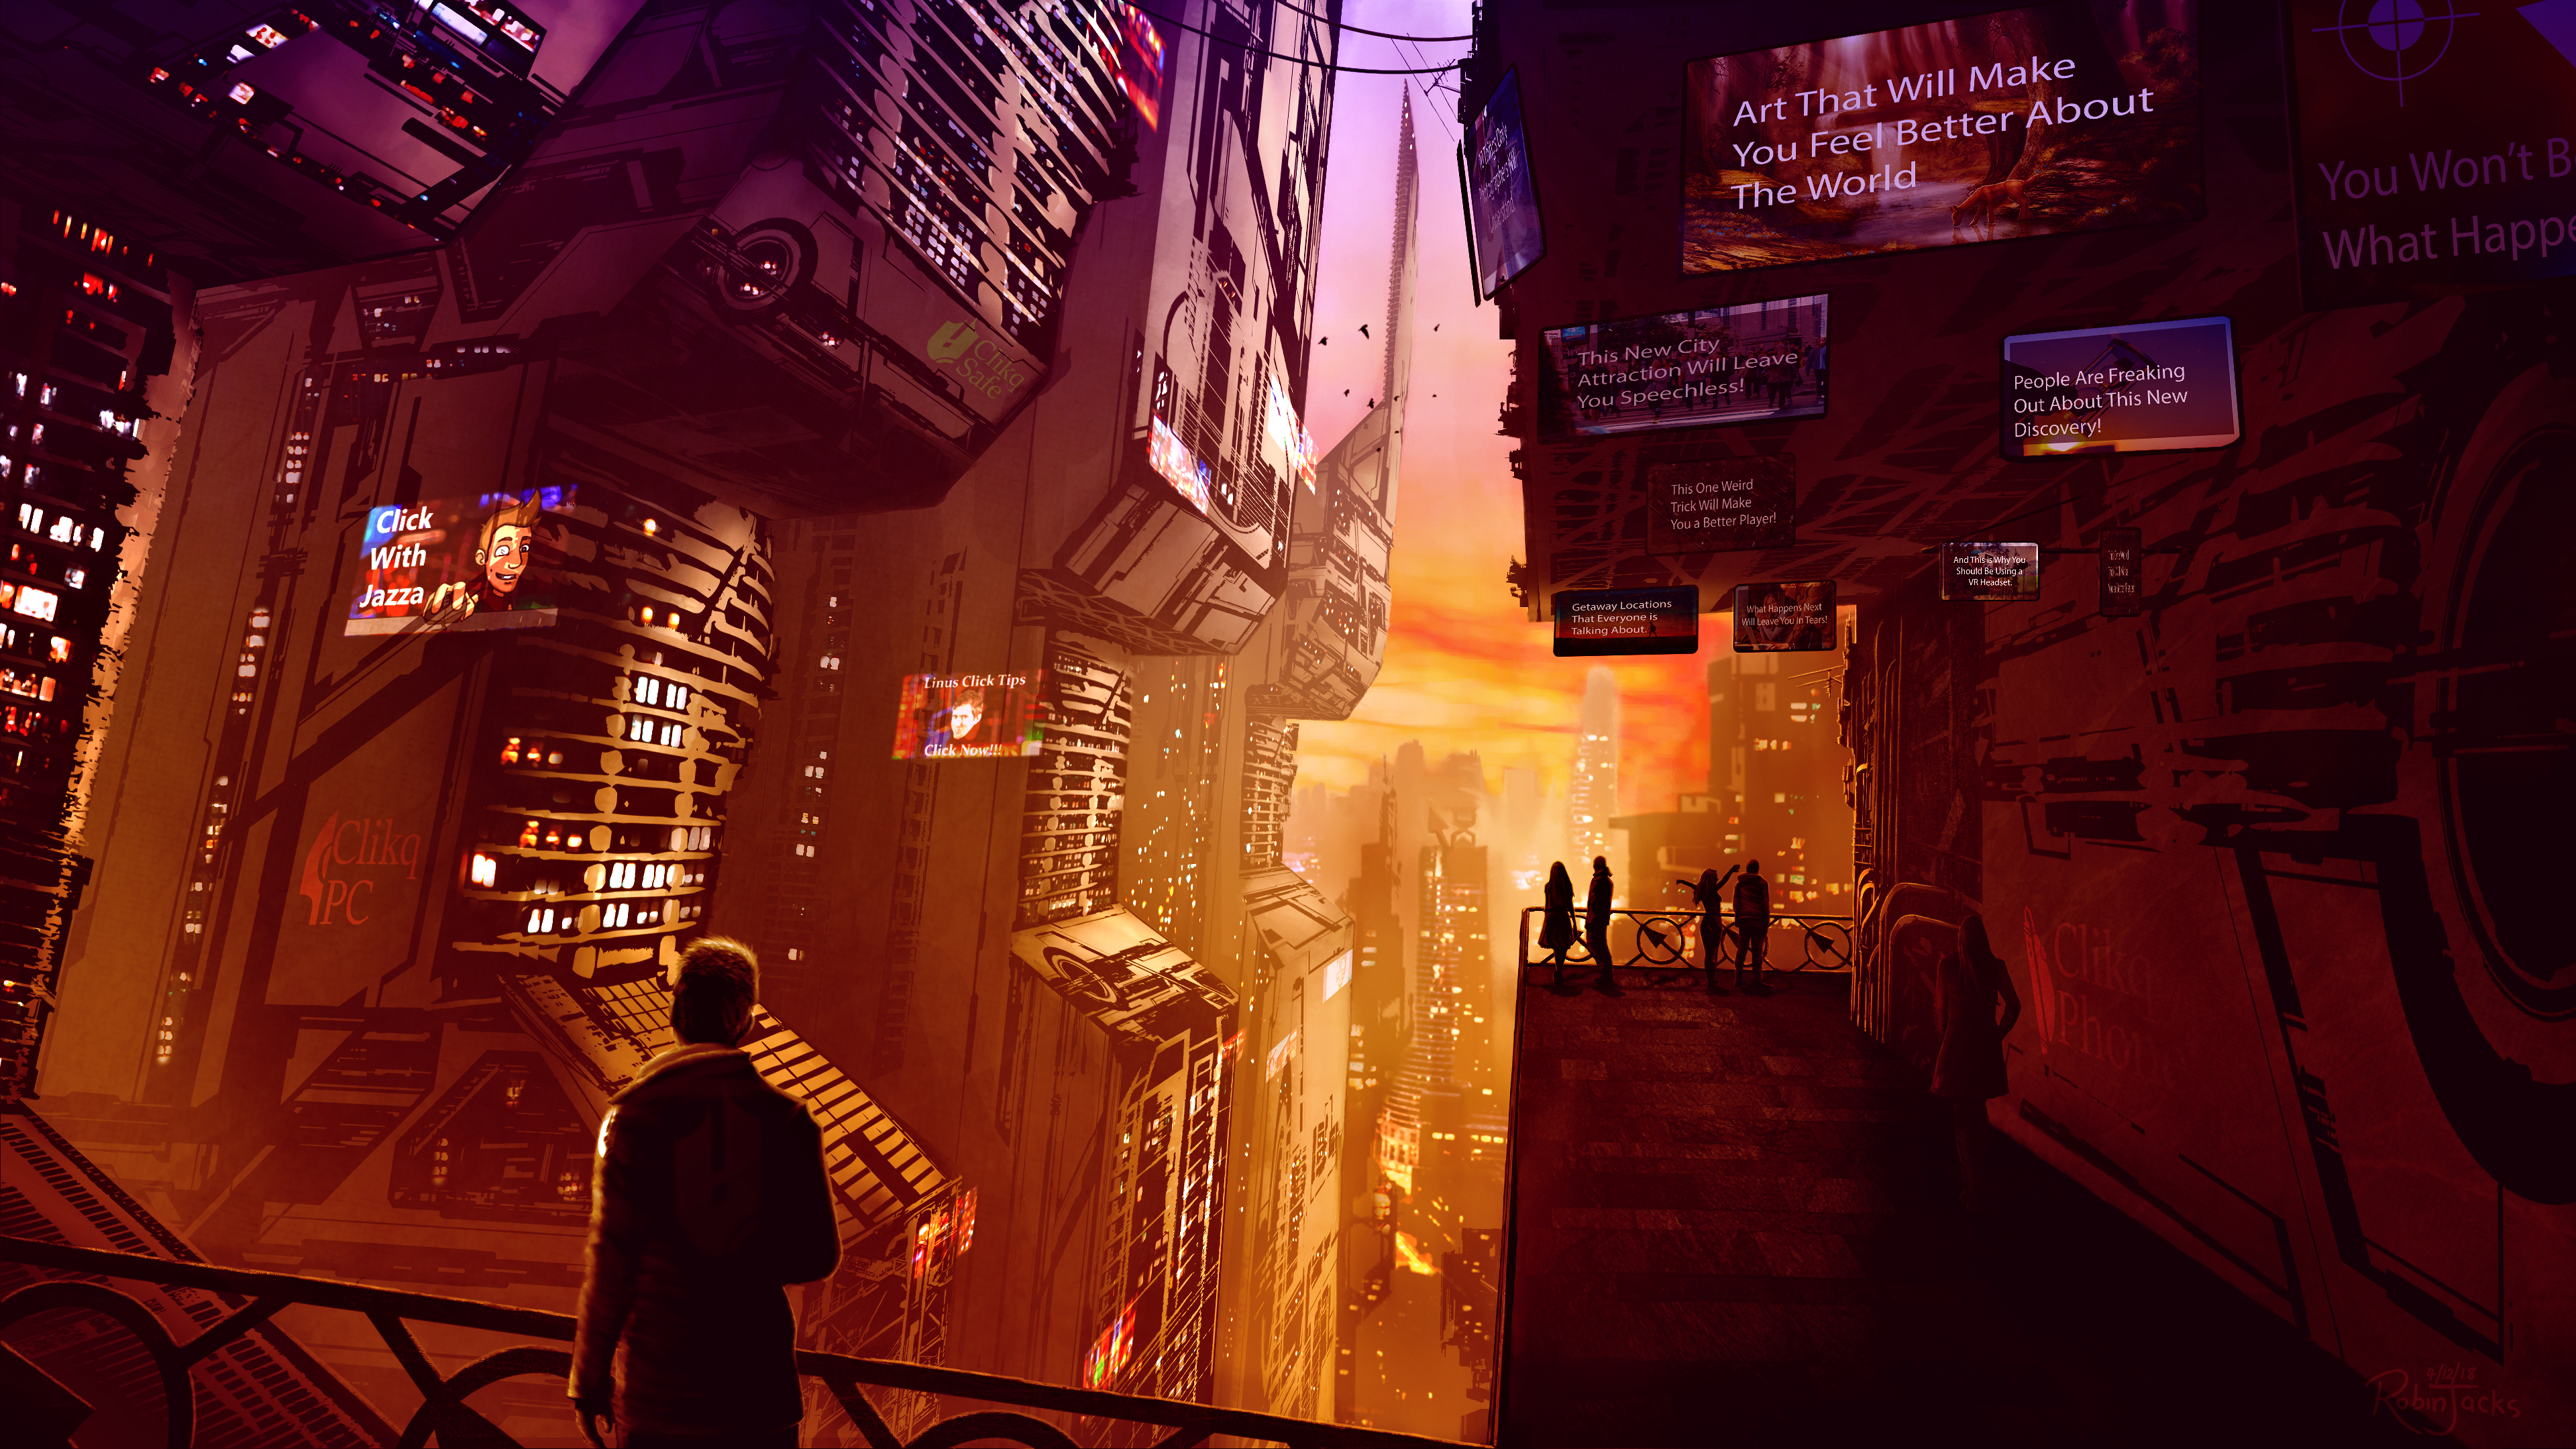 This Is Cyberpunk City, HD Artist, 4k Wallpapers, Images, Backgrounds